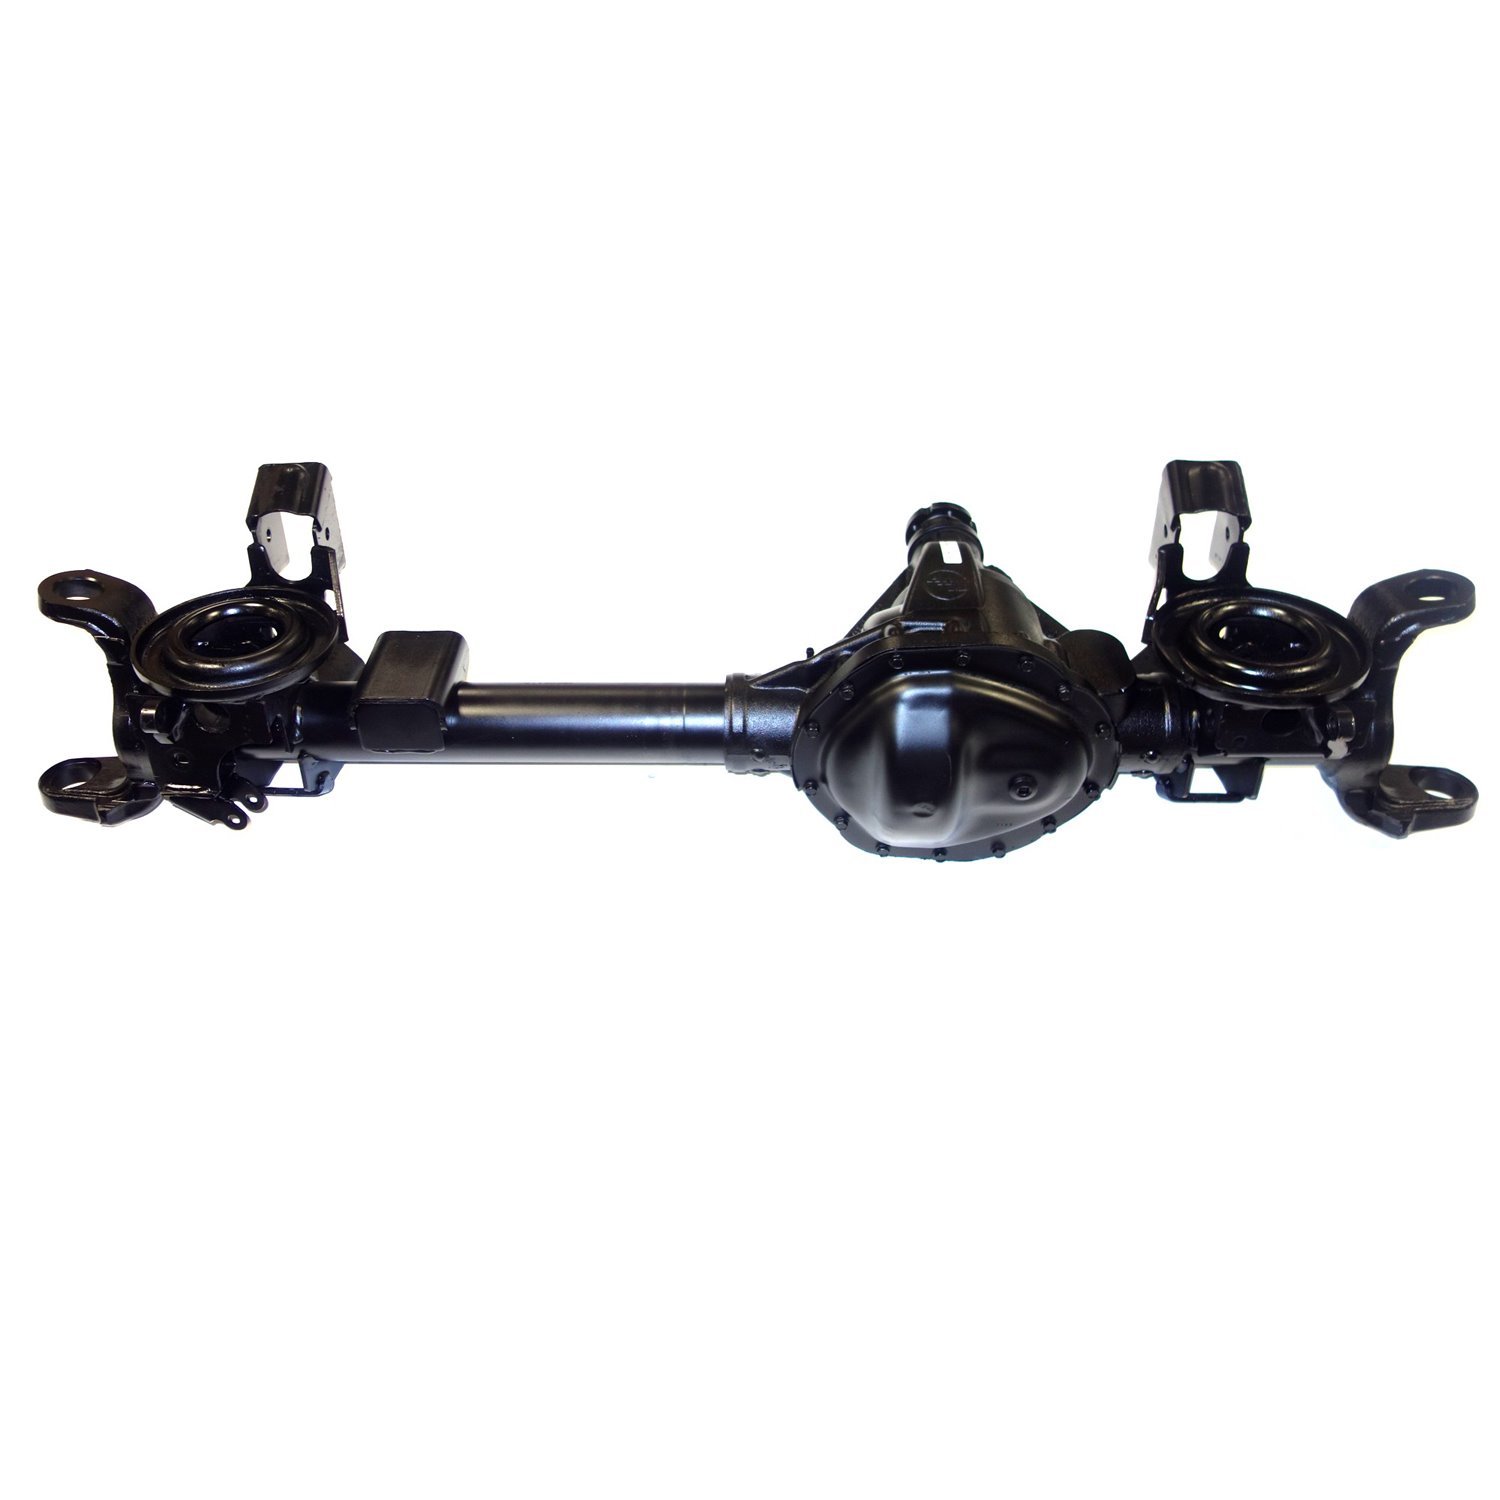 Remanufactured Chy 9.25" Axle Assy for 3/19/07-2008 Ram 1500 Mega Cab, 2500 & 3500, 4.10